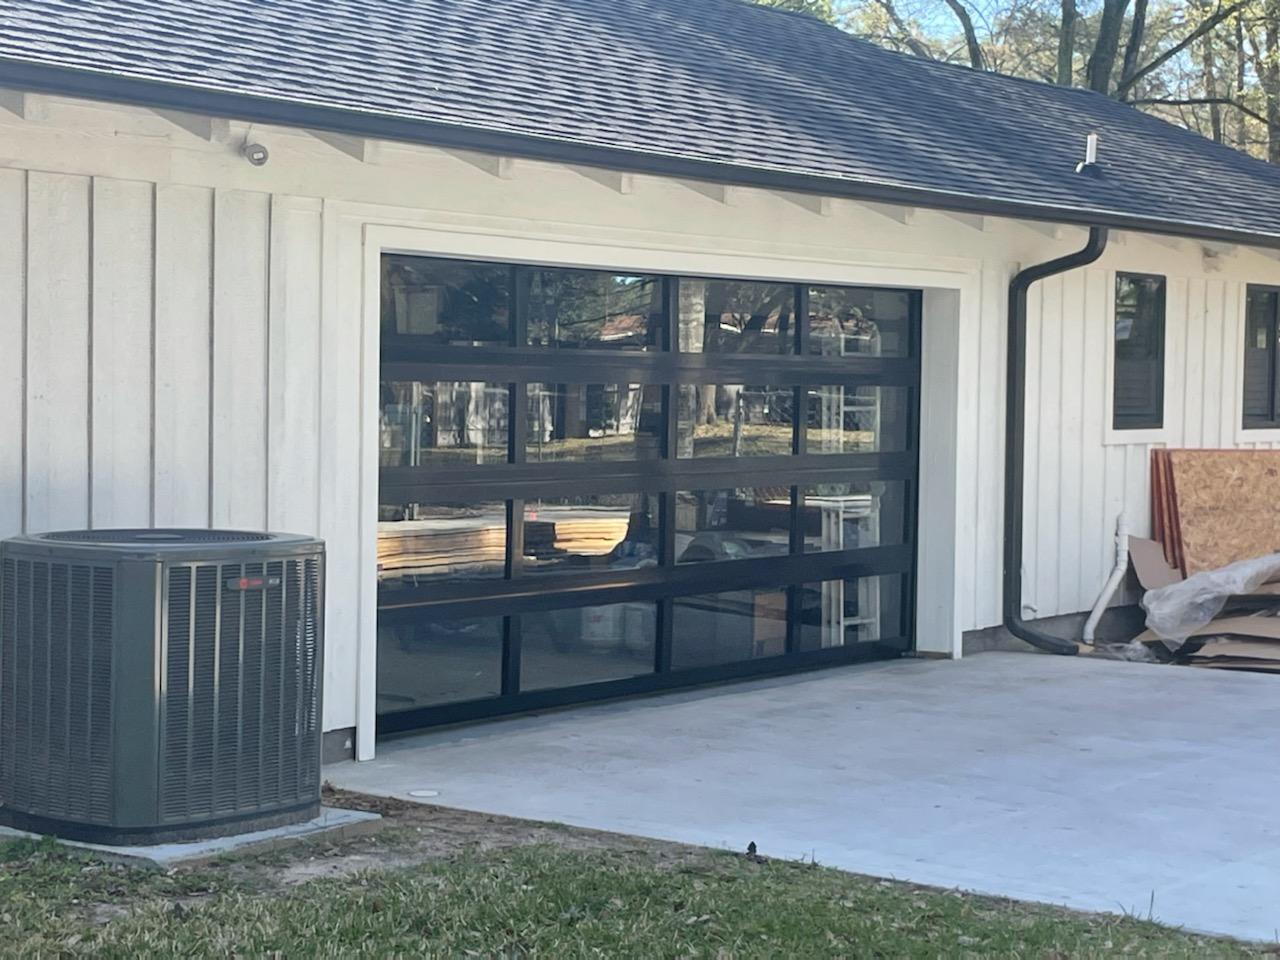 18 FT Wide By 8 FT Tall Full View Garage Door Matt Black Finish With Clear Glass